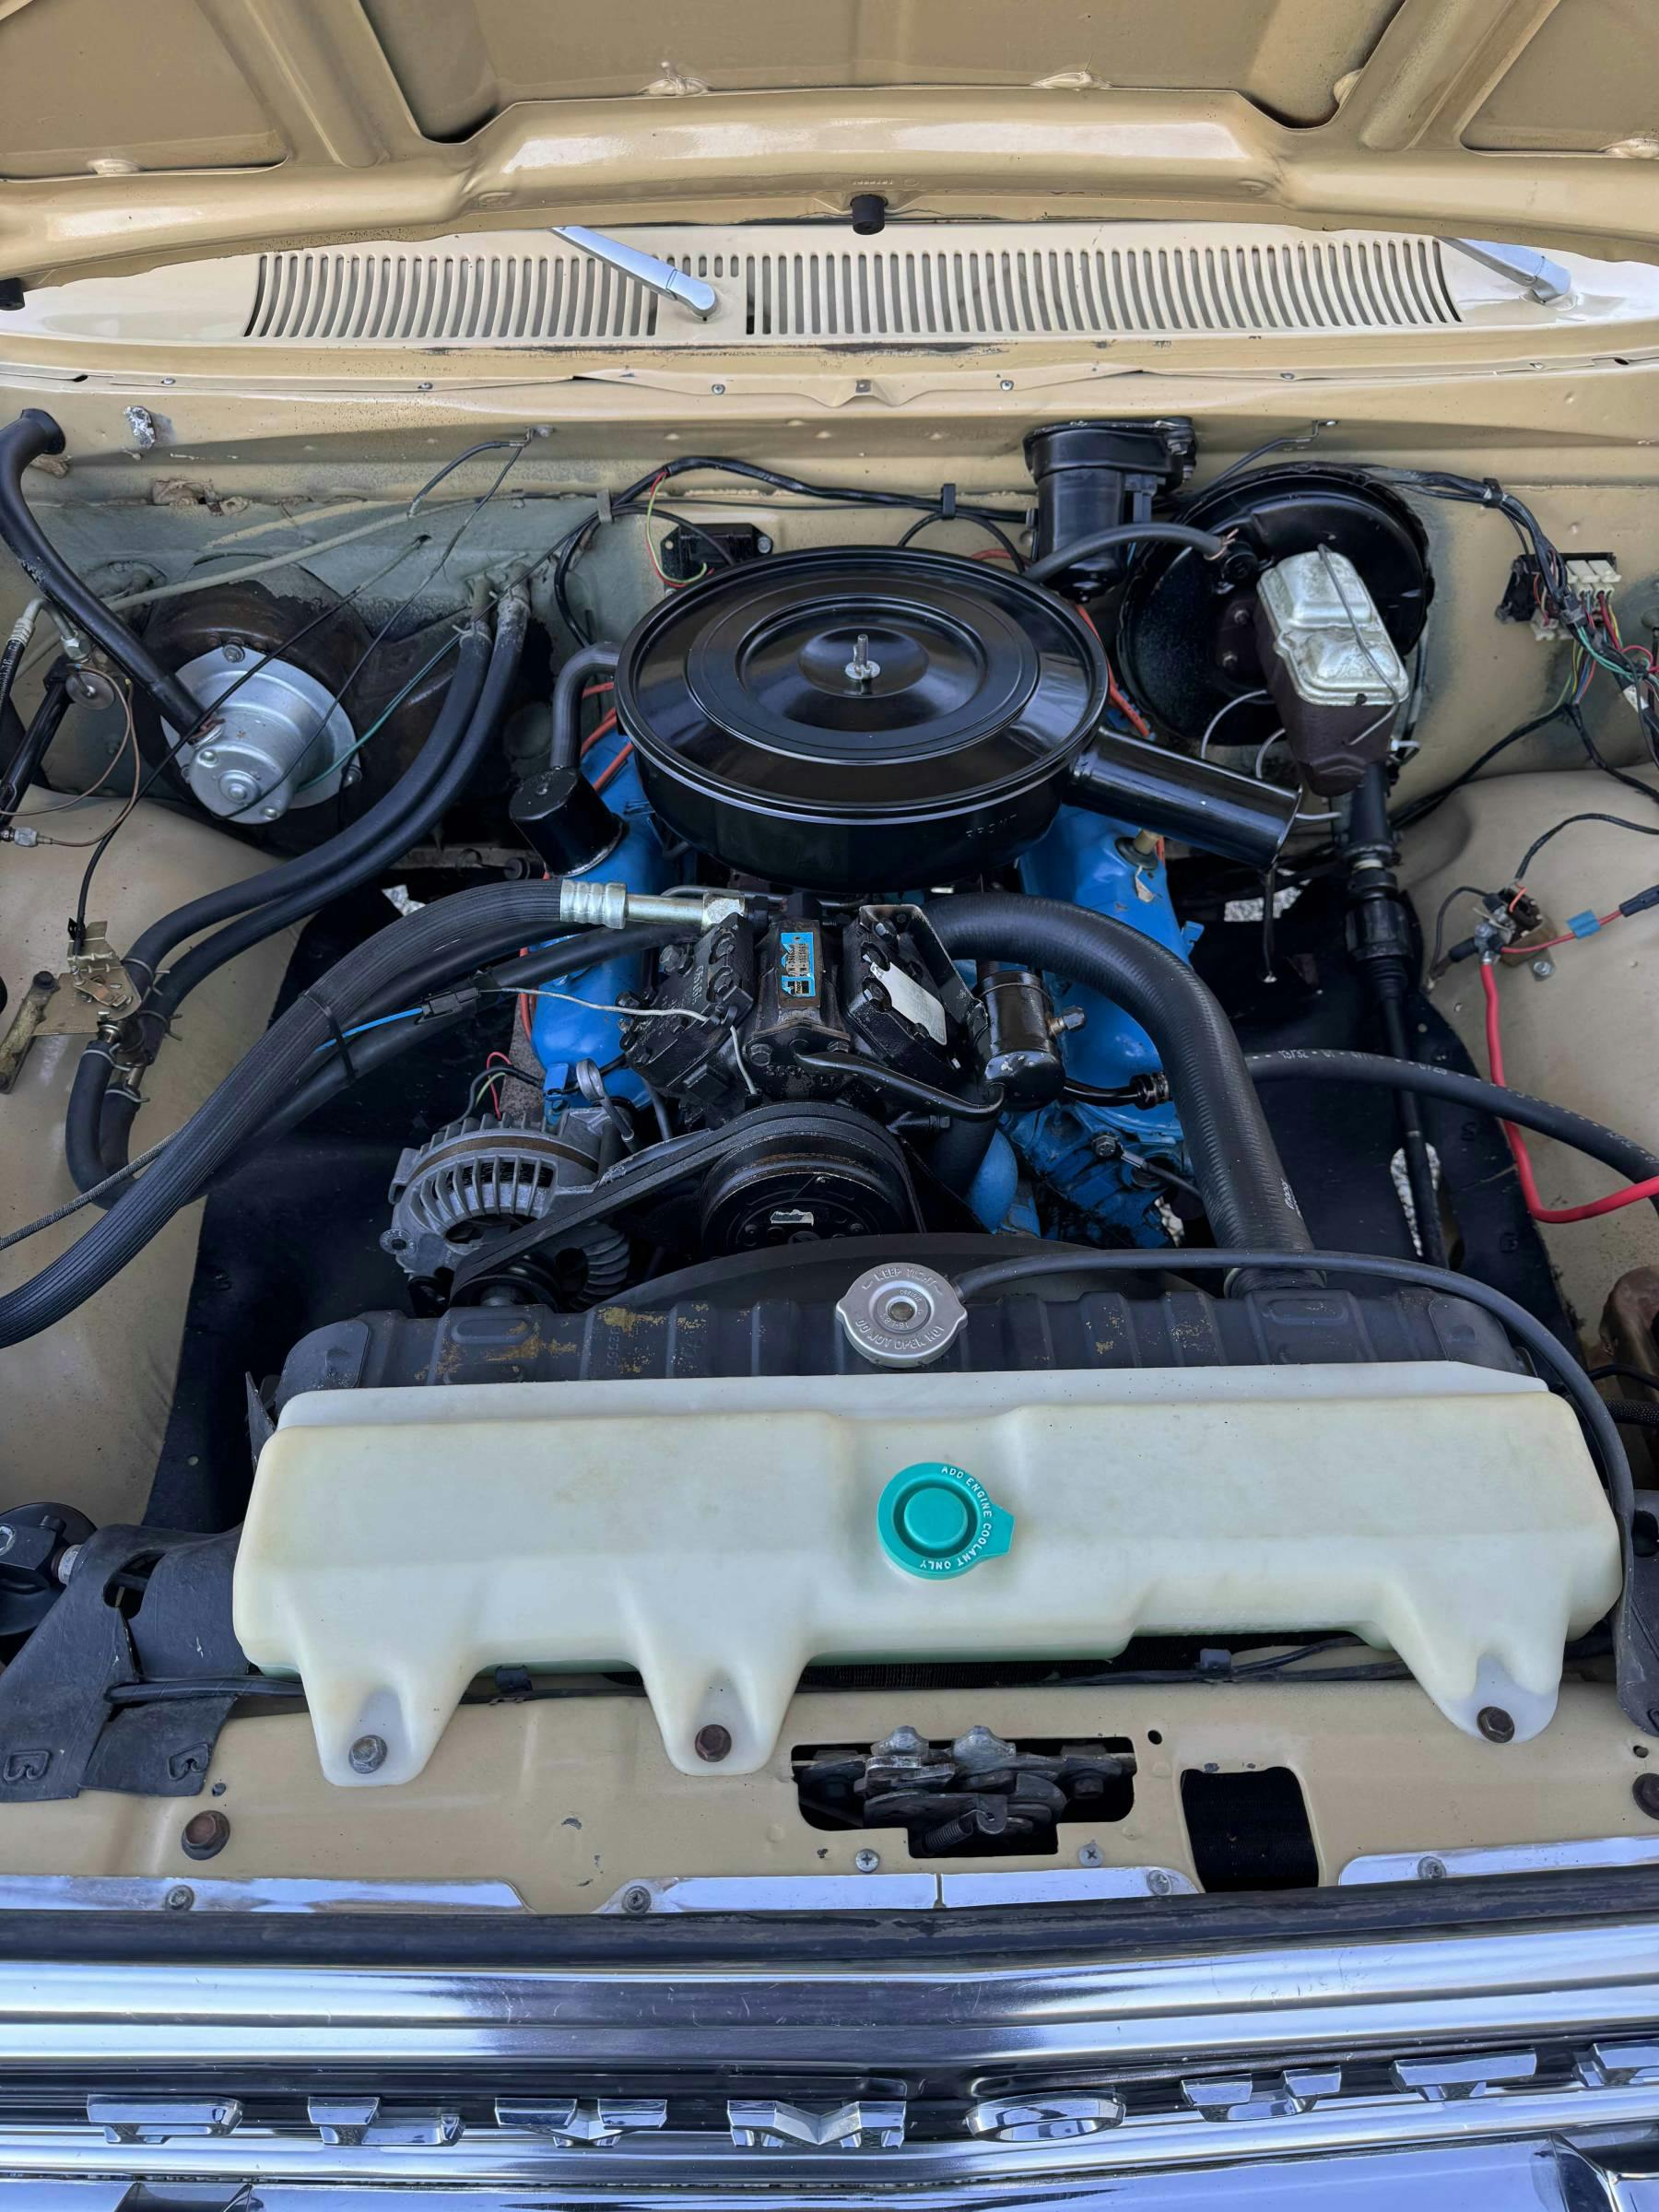 1976 Plymouth Trail Duster engine bay full